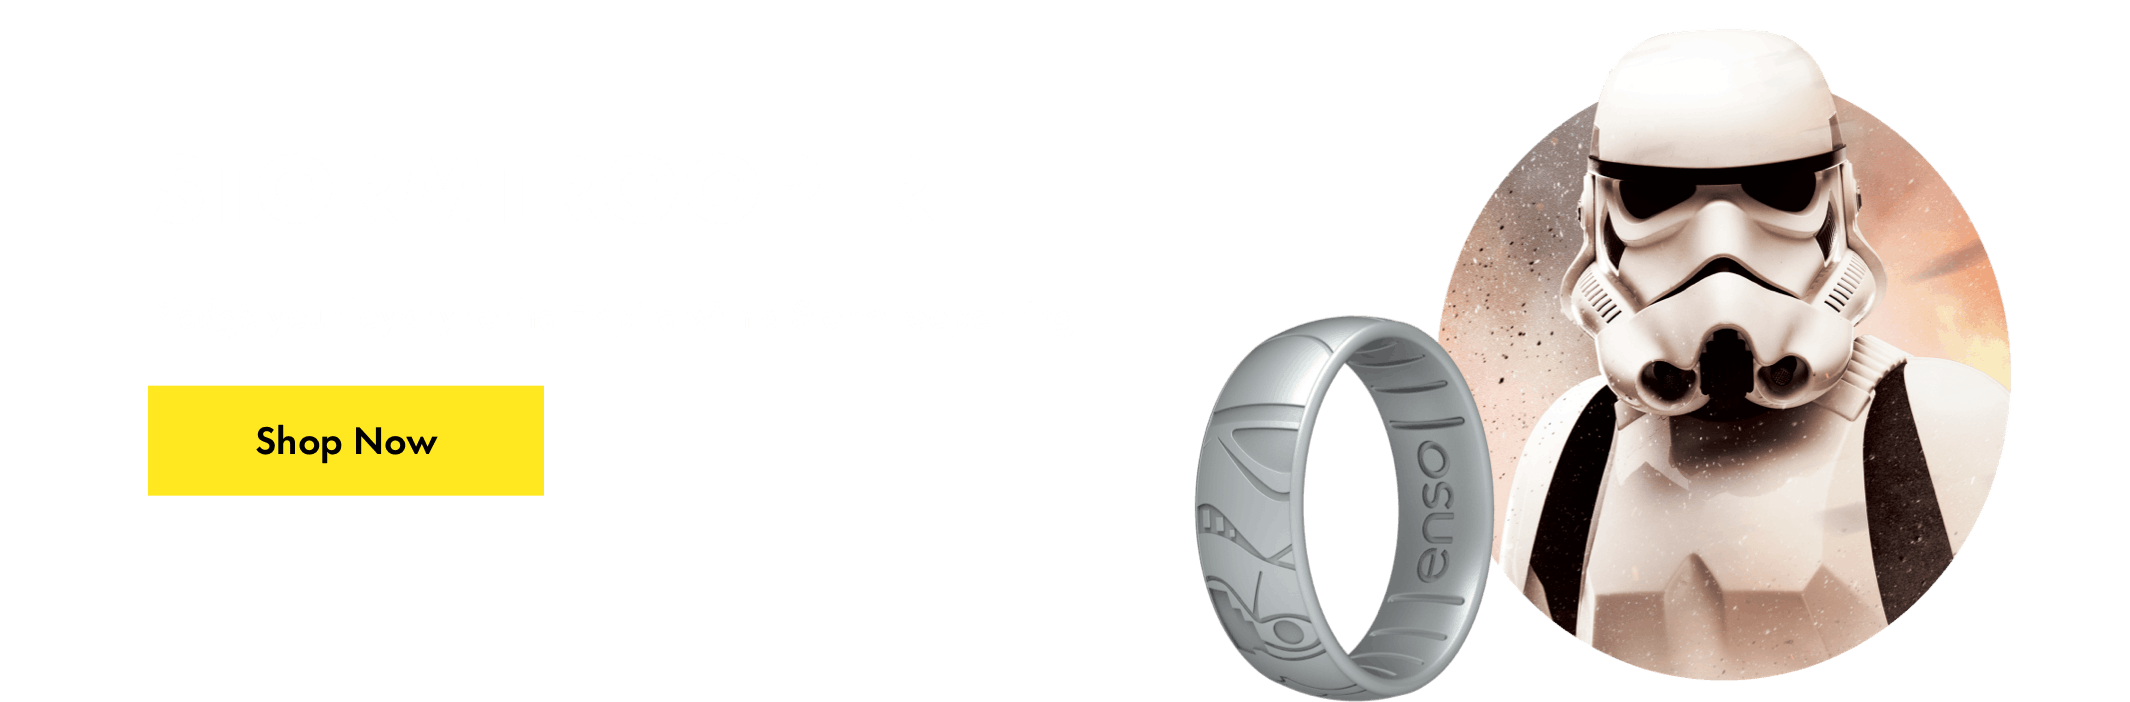 Stormtrooper ring. Pledge your loyalty to the empire with a Stormtrooper ring. Click here to shop now.
